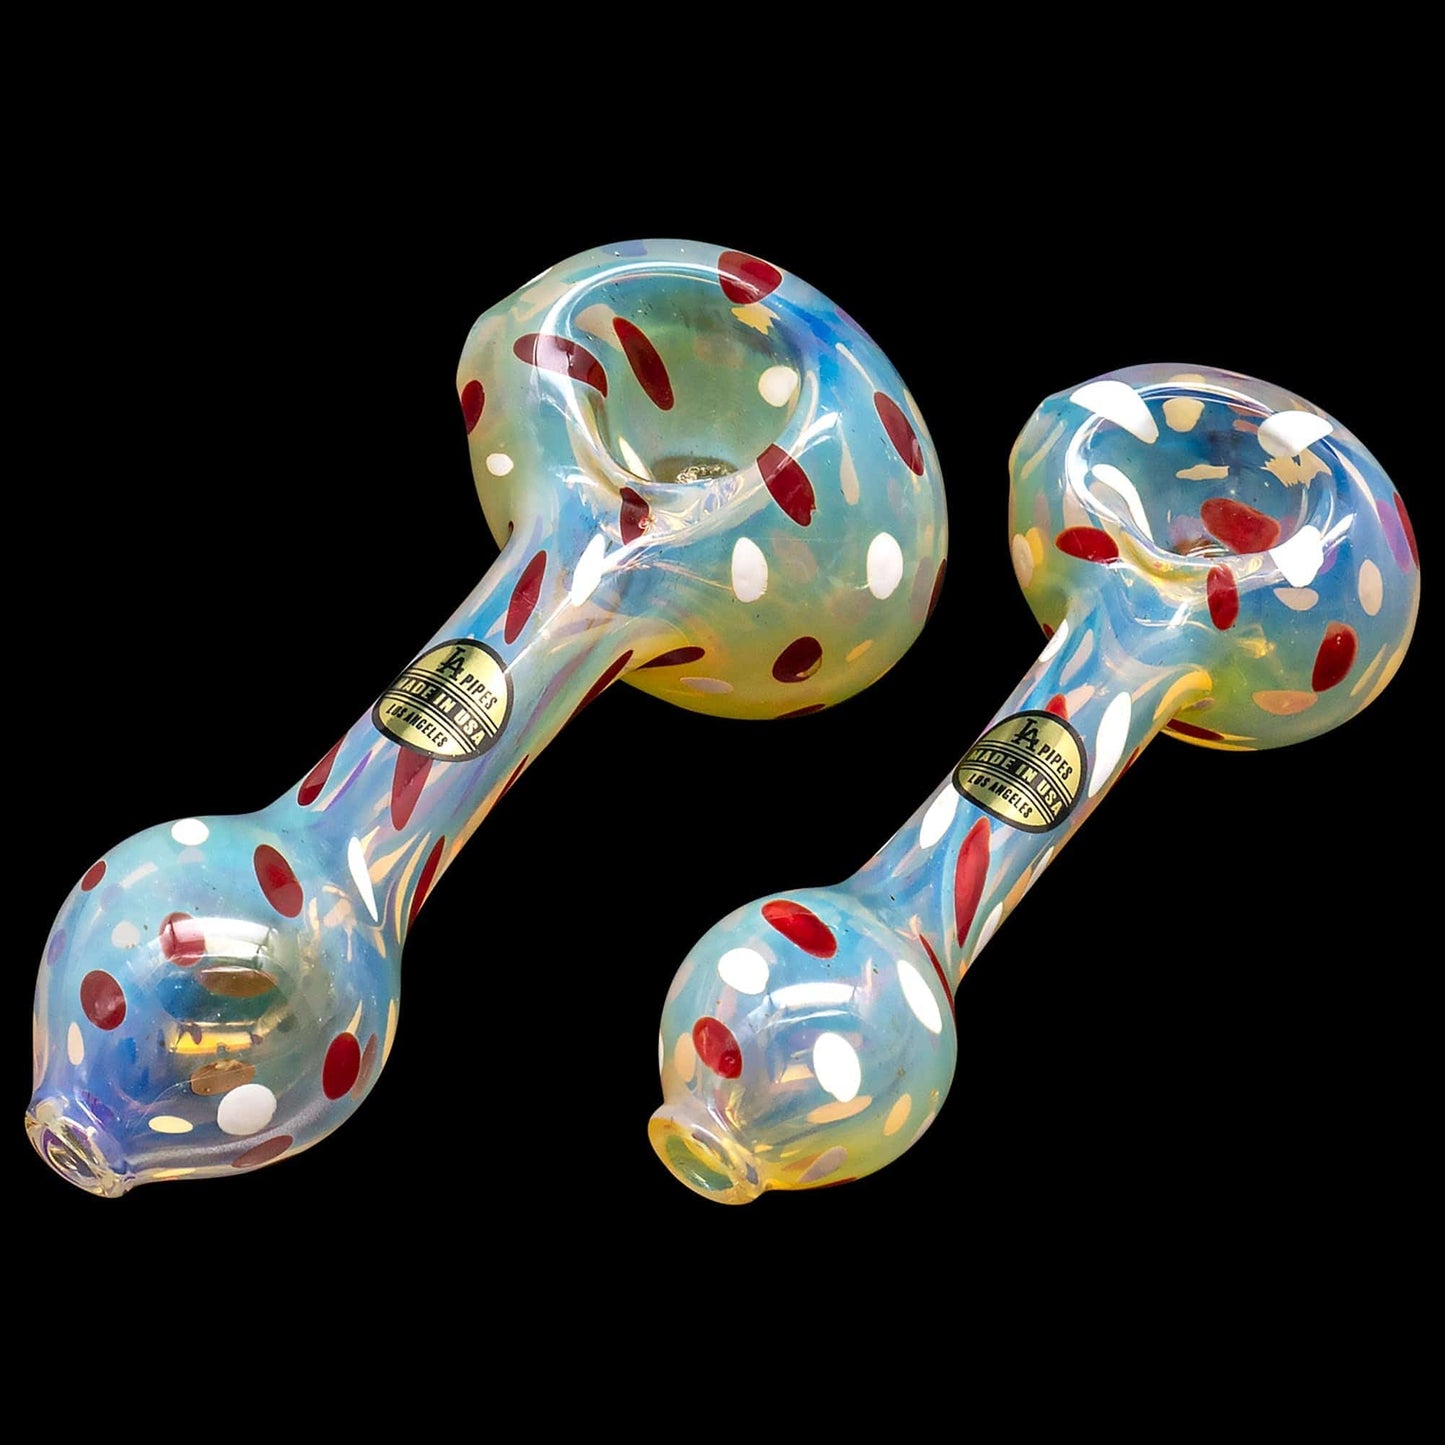 LA Pipes Hand Pipe Red Hue / 3.5 Inch "Polka Dot" Glass Spoon Pipe